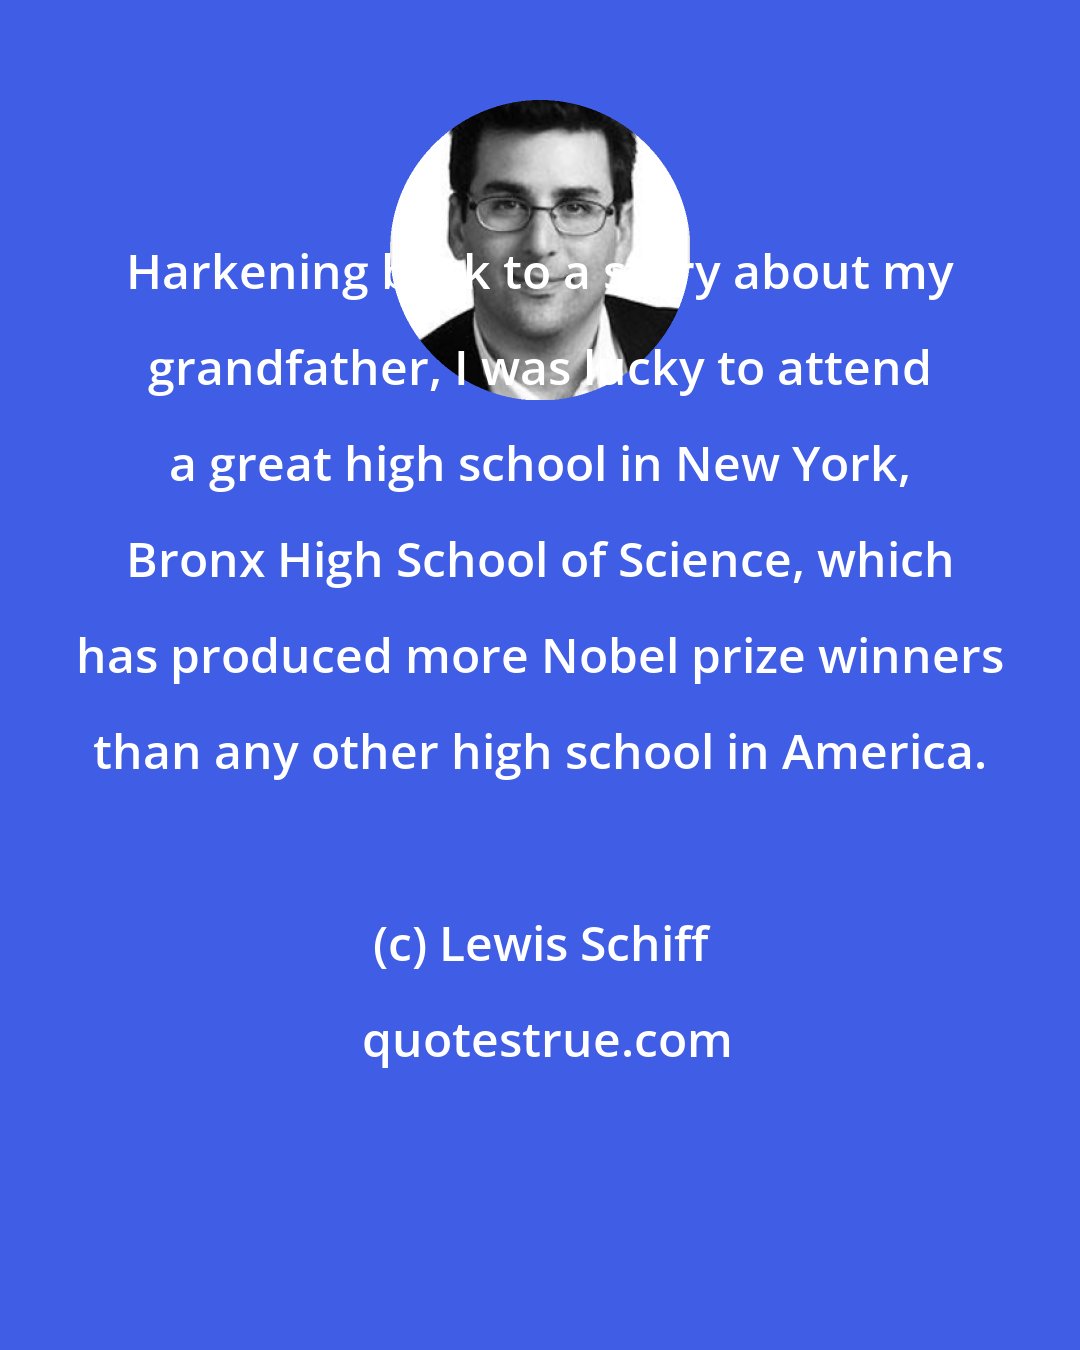 Lewis Schiff: Harkening back to a story about my grandfather, I was lucky to attend a great high school in New York, Bronx High School of Science, which has produced more Nobel prize winners than any other high school in America.